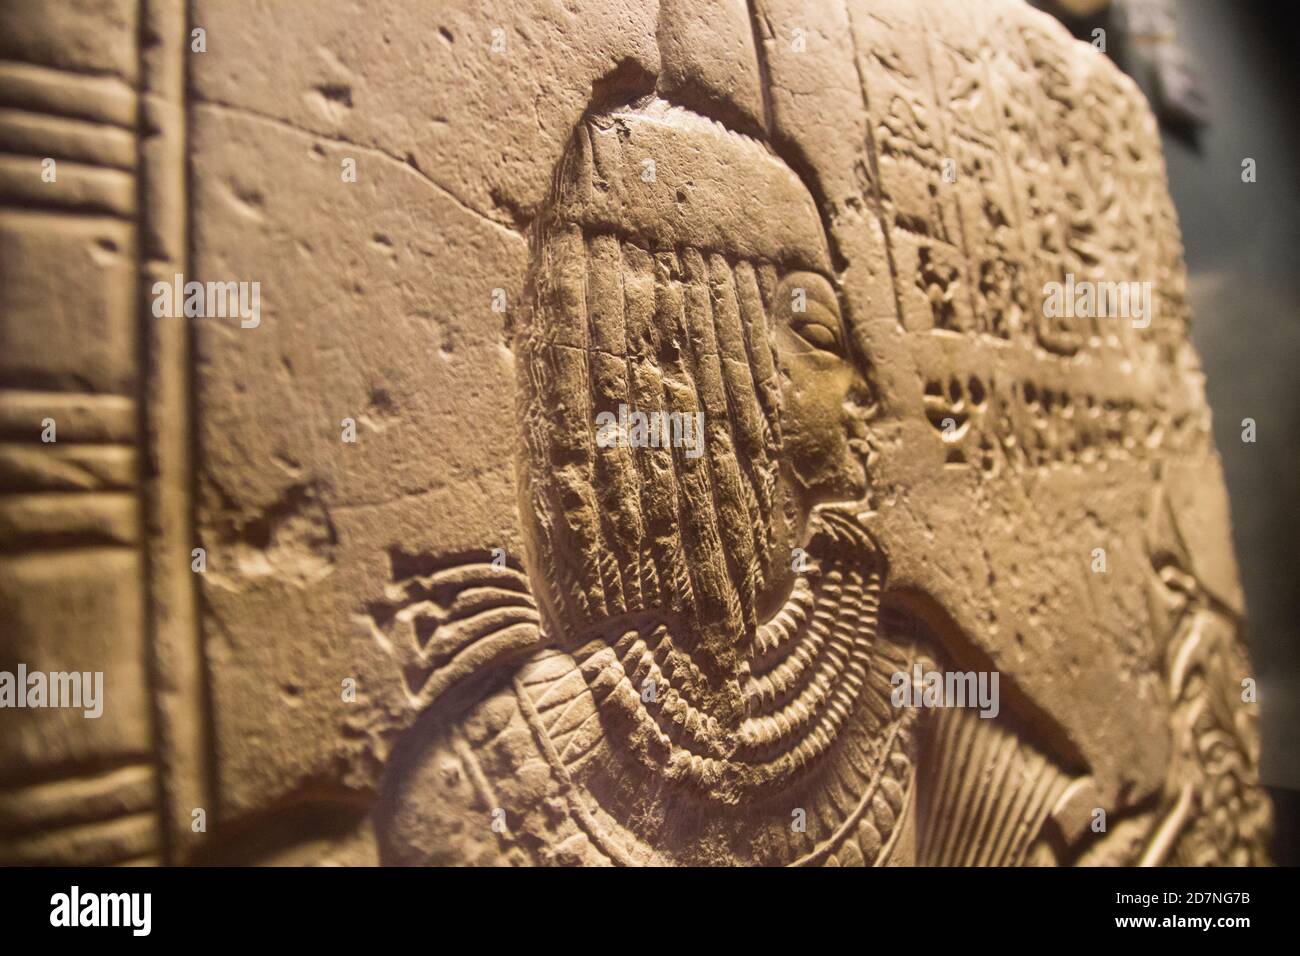 ancient egypt wall with woman's face. The ancient Egyptian art of hieroglyphs carving on stone. Stock Photo